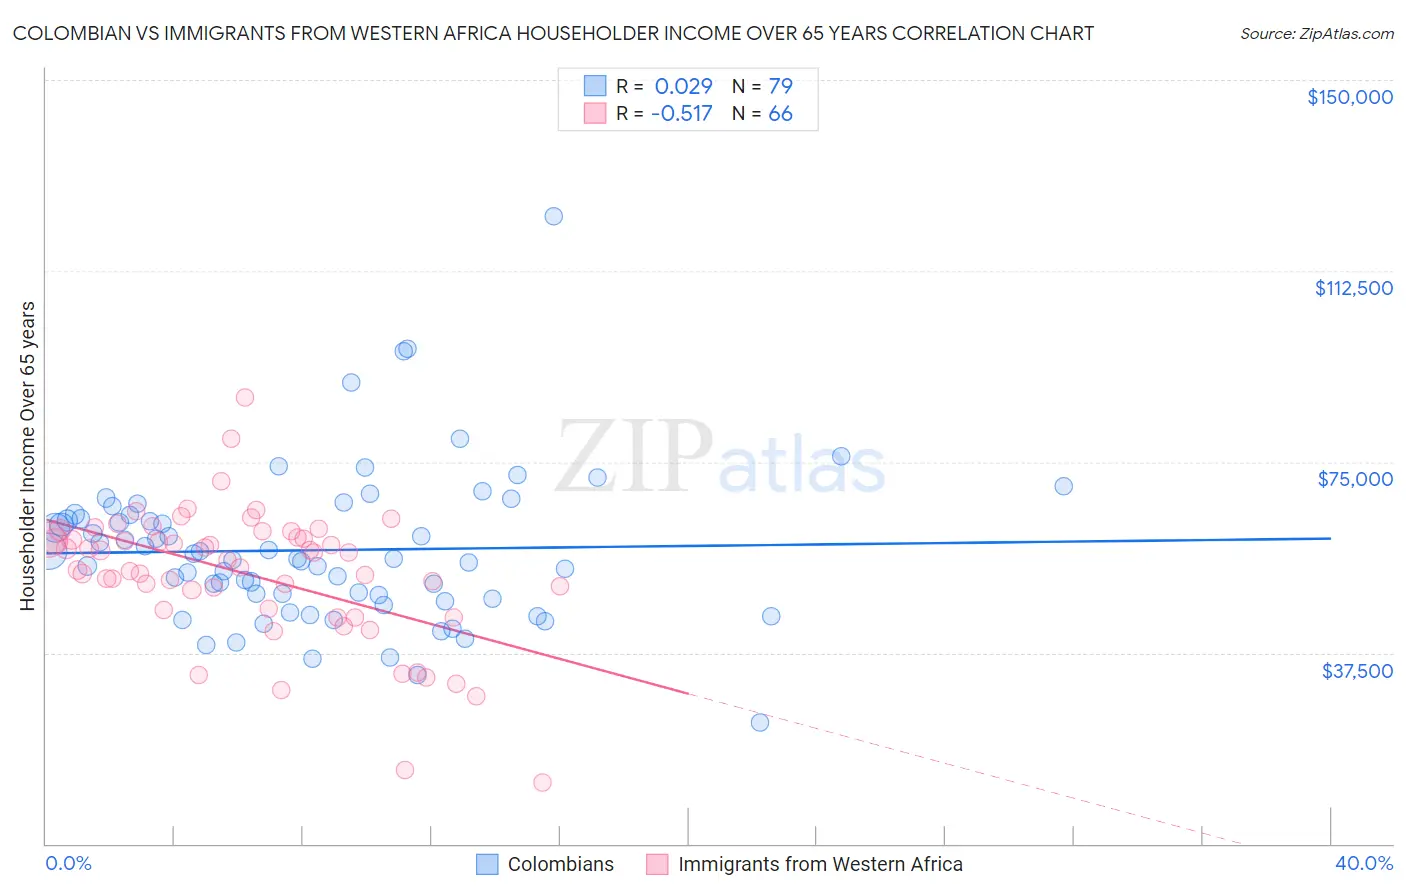 Colombian vs Immigrants from Western Africa Householder Income Over 65 years